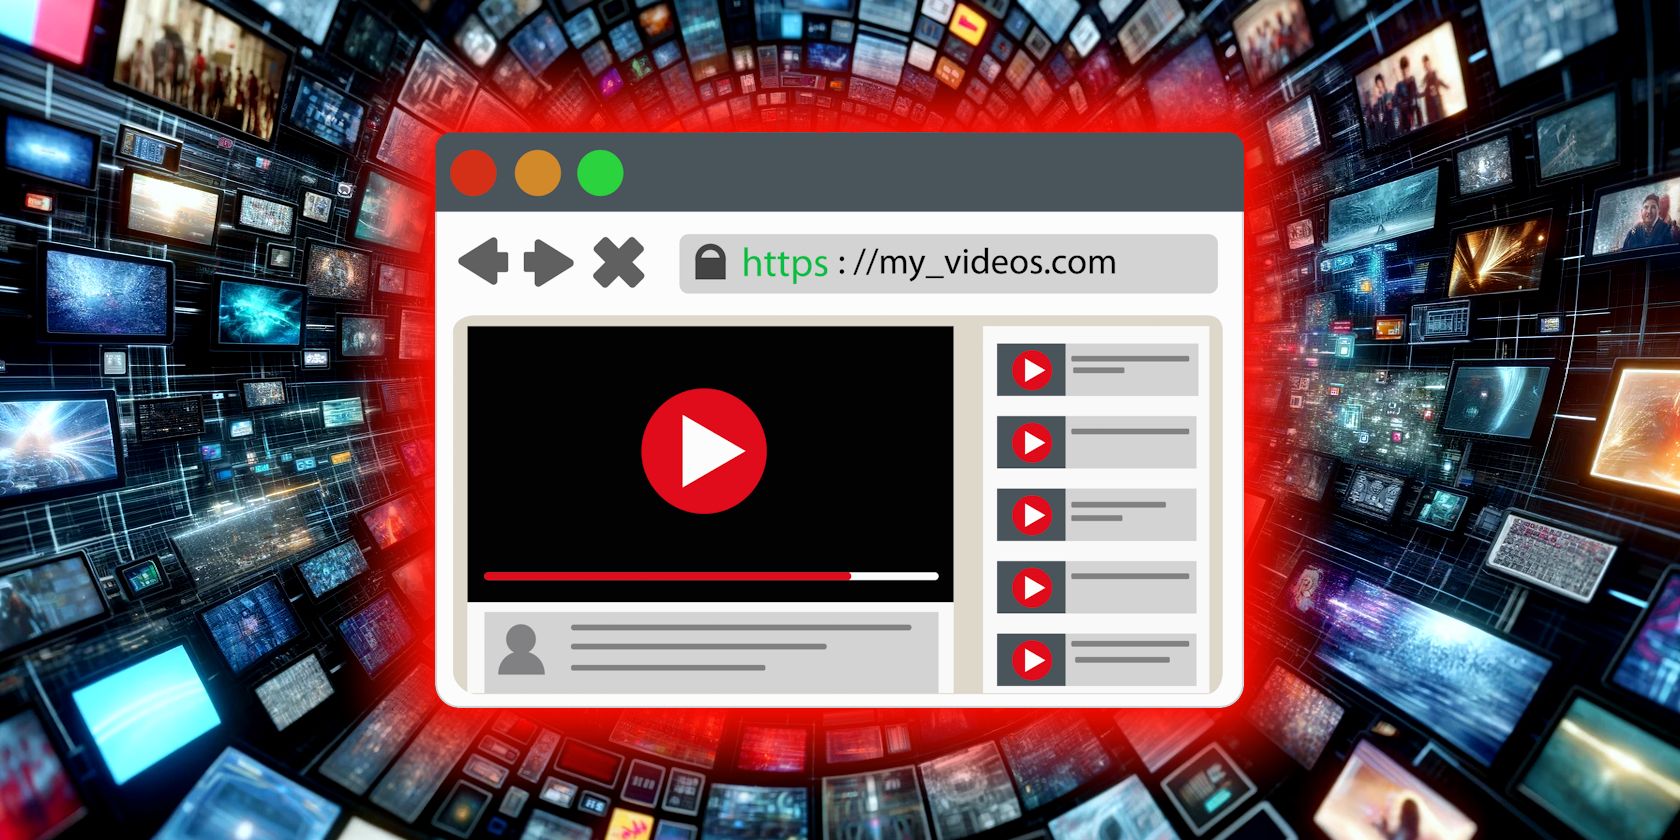 download video from internet with mock up web browser